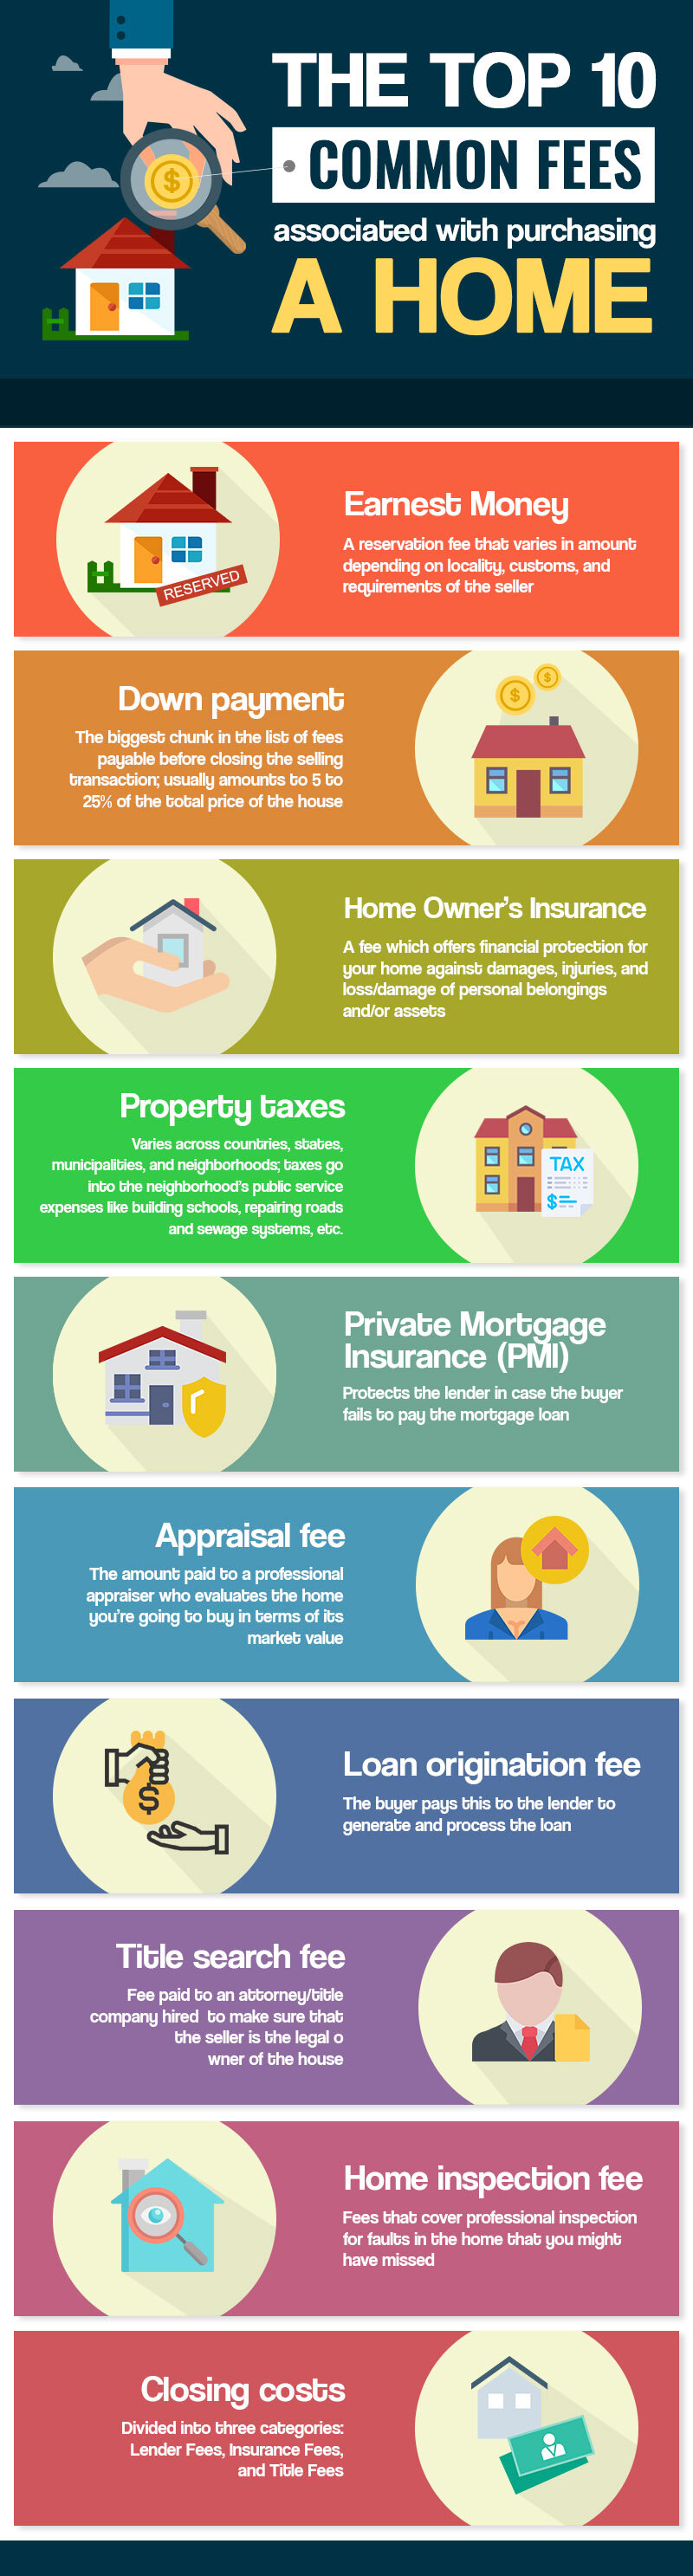 Top 10 Fees You Need To Know About When Purchasing A Home